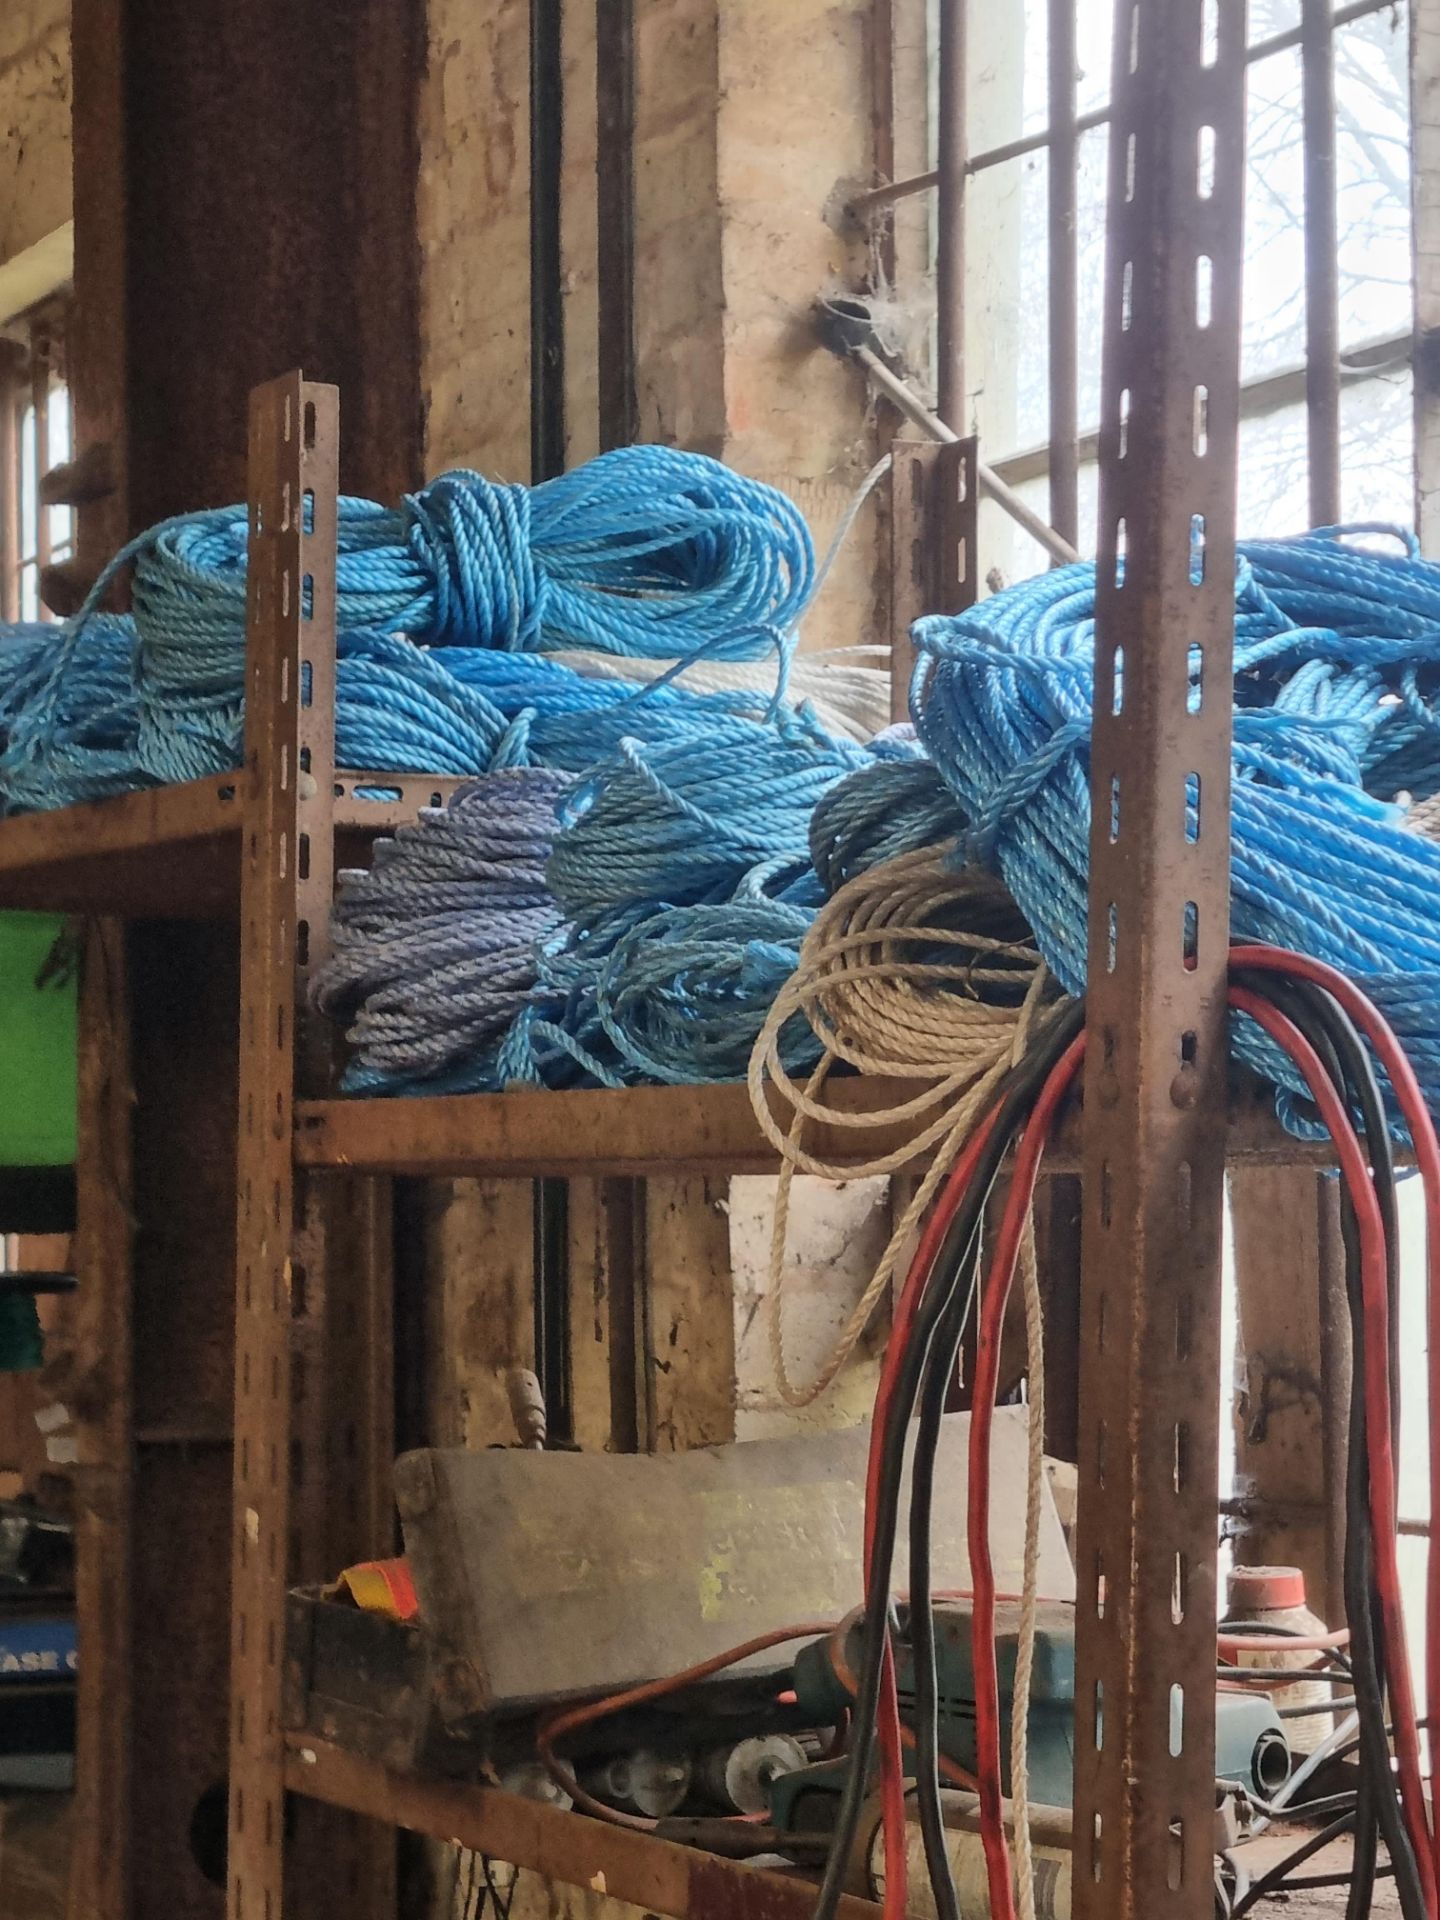 A large quantity of blue nylon twine rope as found